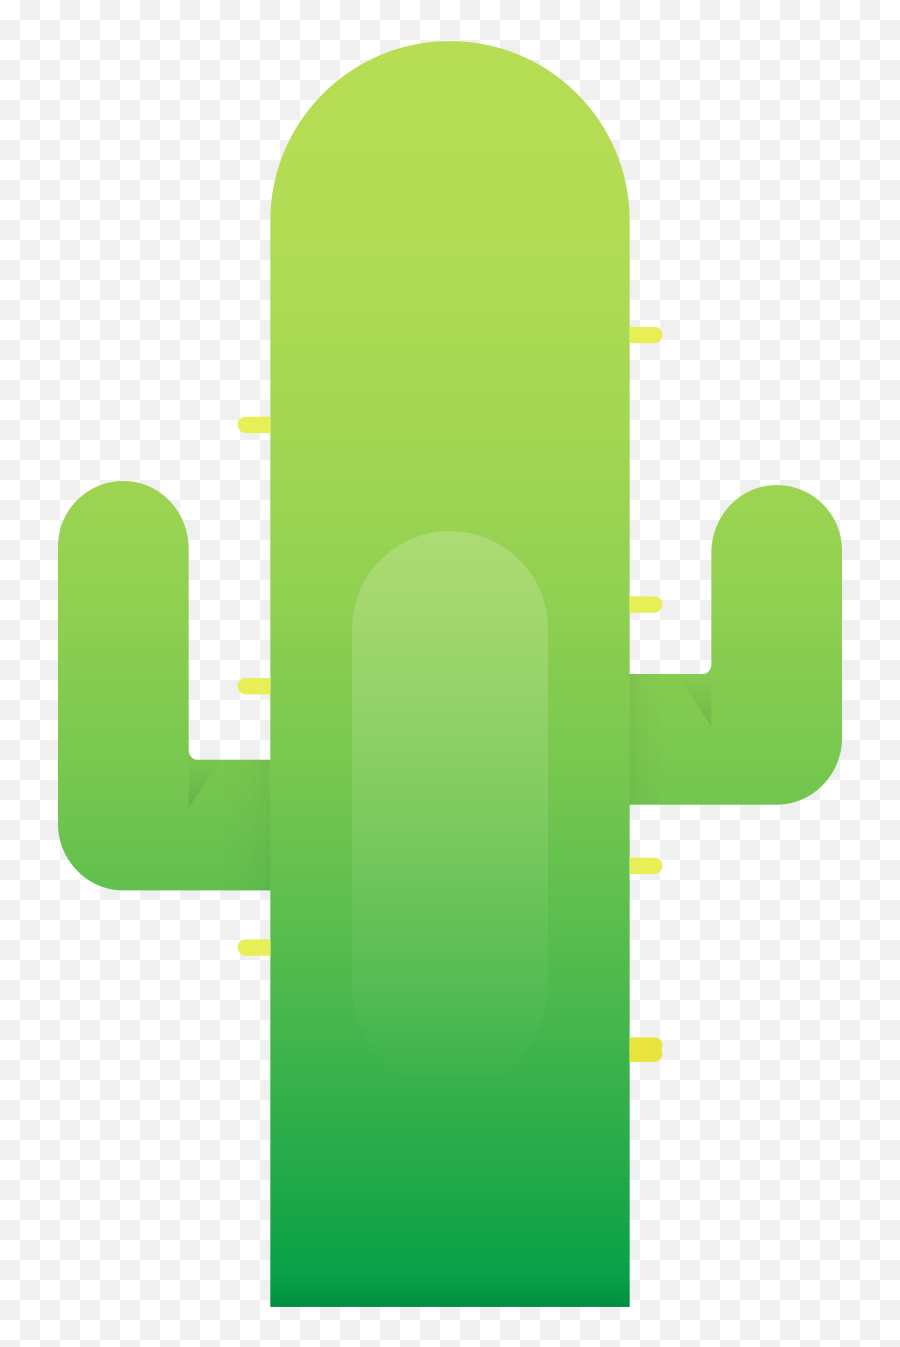 Style Cactus Vector Images In Png And Svg Icons8 Illustrations Emoji,Green Food Emoji